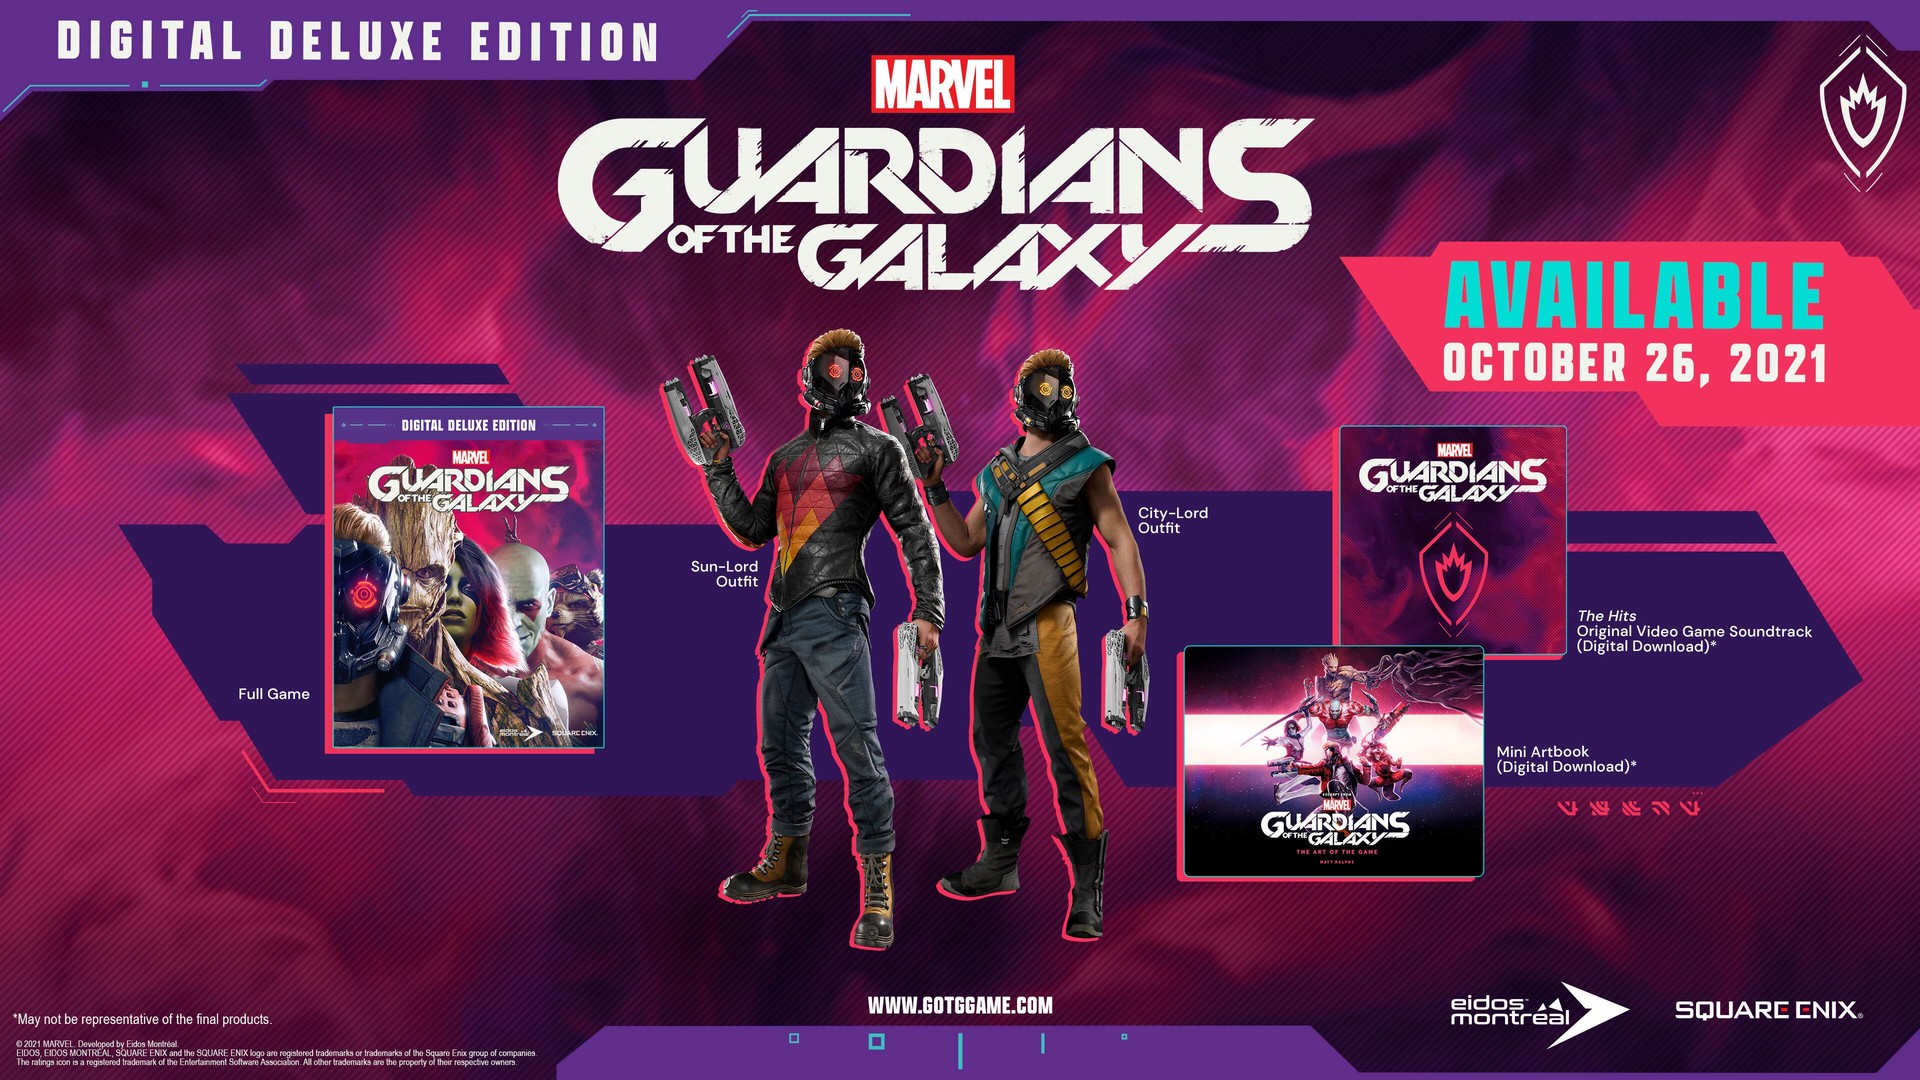 Save 70% on Marvel's Guardians of the Galaxy on Steam